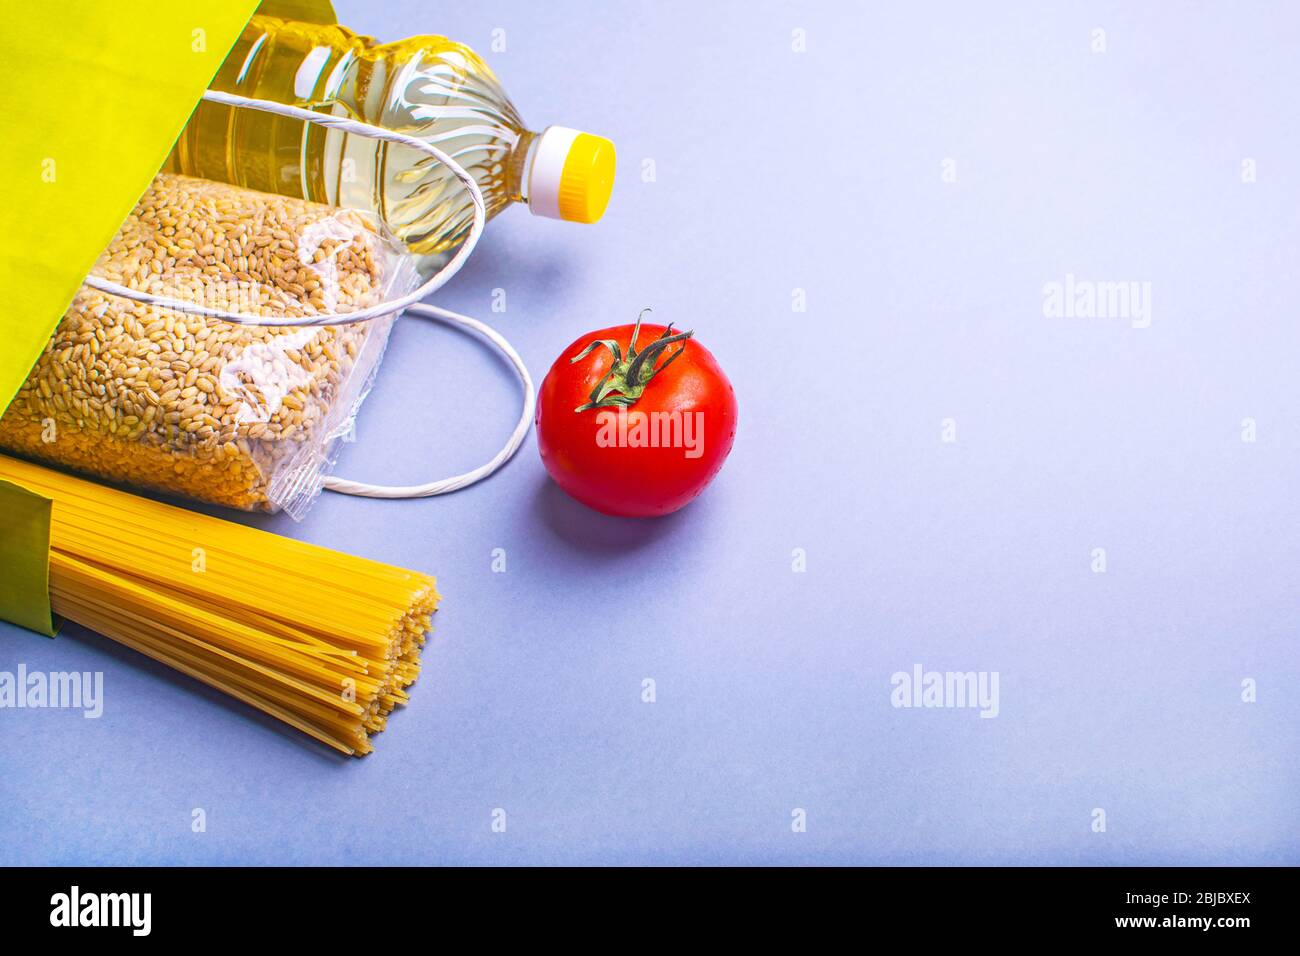 Food supplies for quarantine on lilac background. Pasta, vegetables, sunflower oil, cereals. Stock Photo